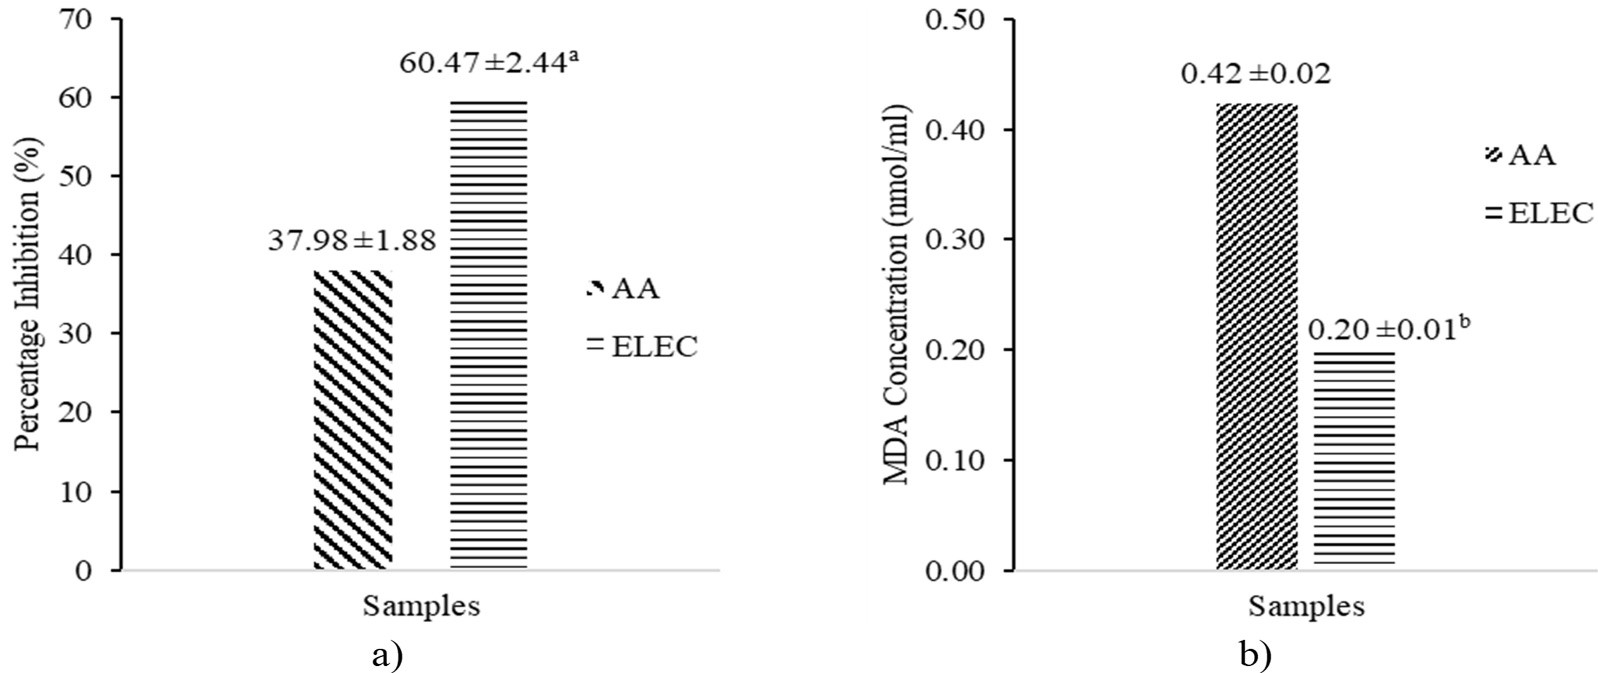 Figure 3. Anti-lipid peroxidation potential of ELEC expressed by: a) FTC and b) TBA methods. Values with a and b superscripts are significantly higher and lower than AA, respectively.